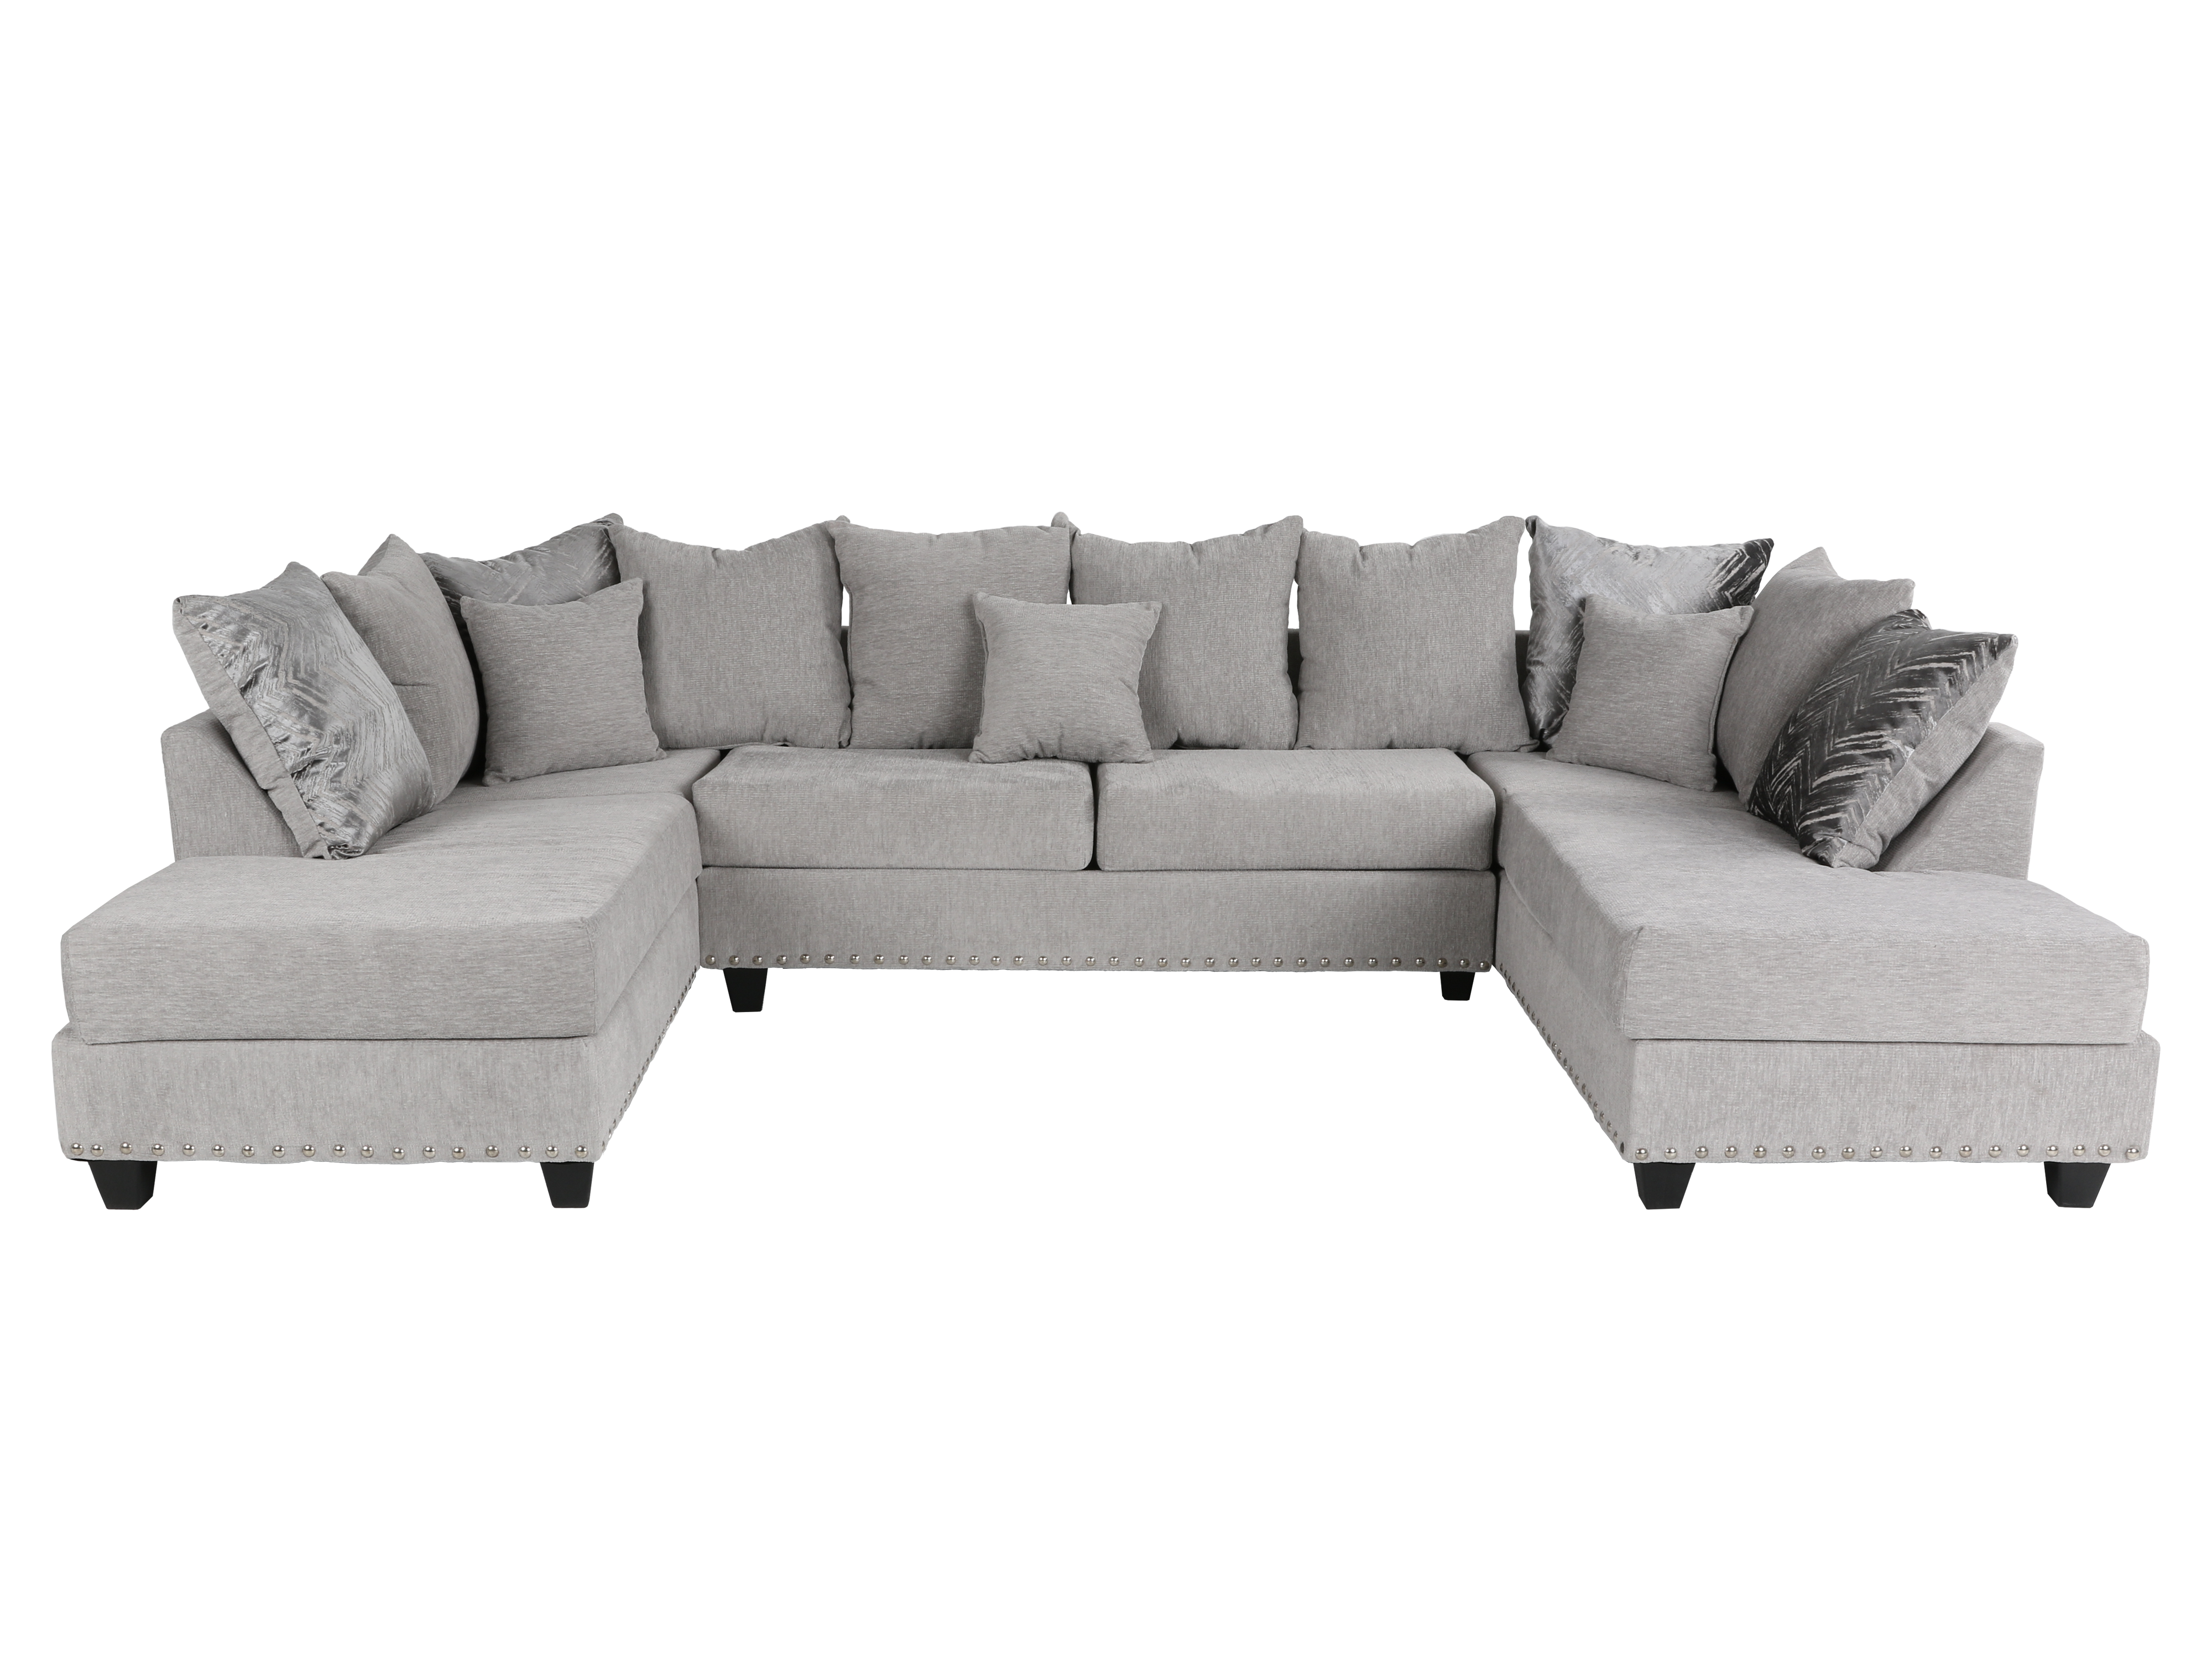 3 Piece Sectional - Suave Dove